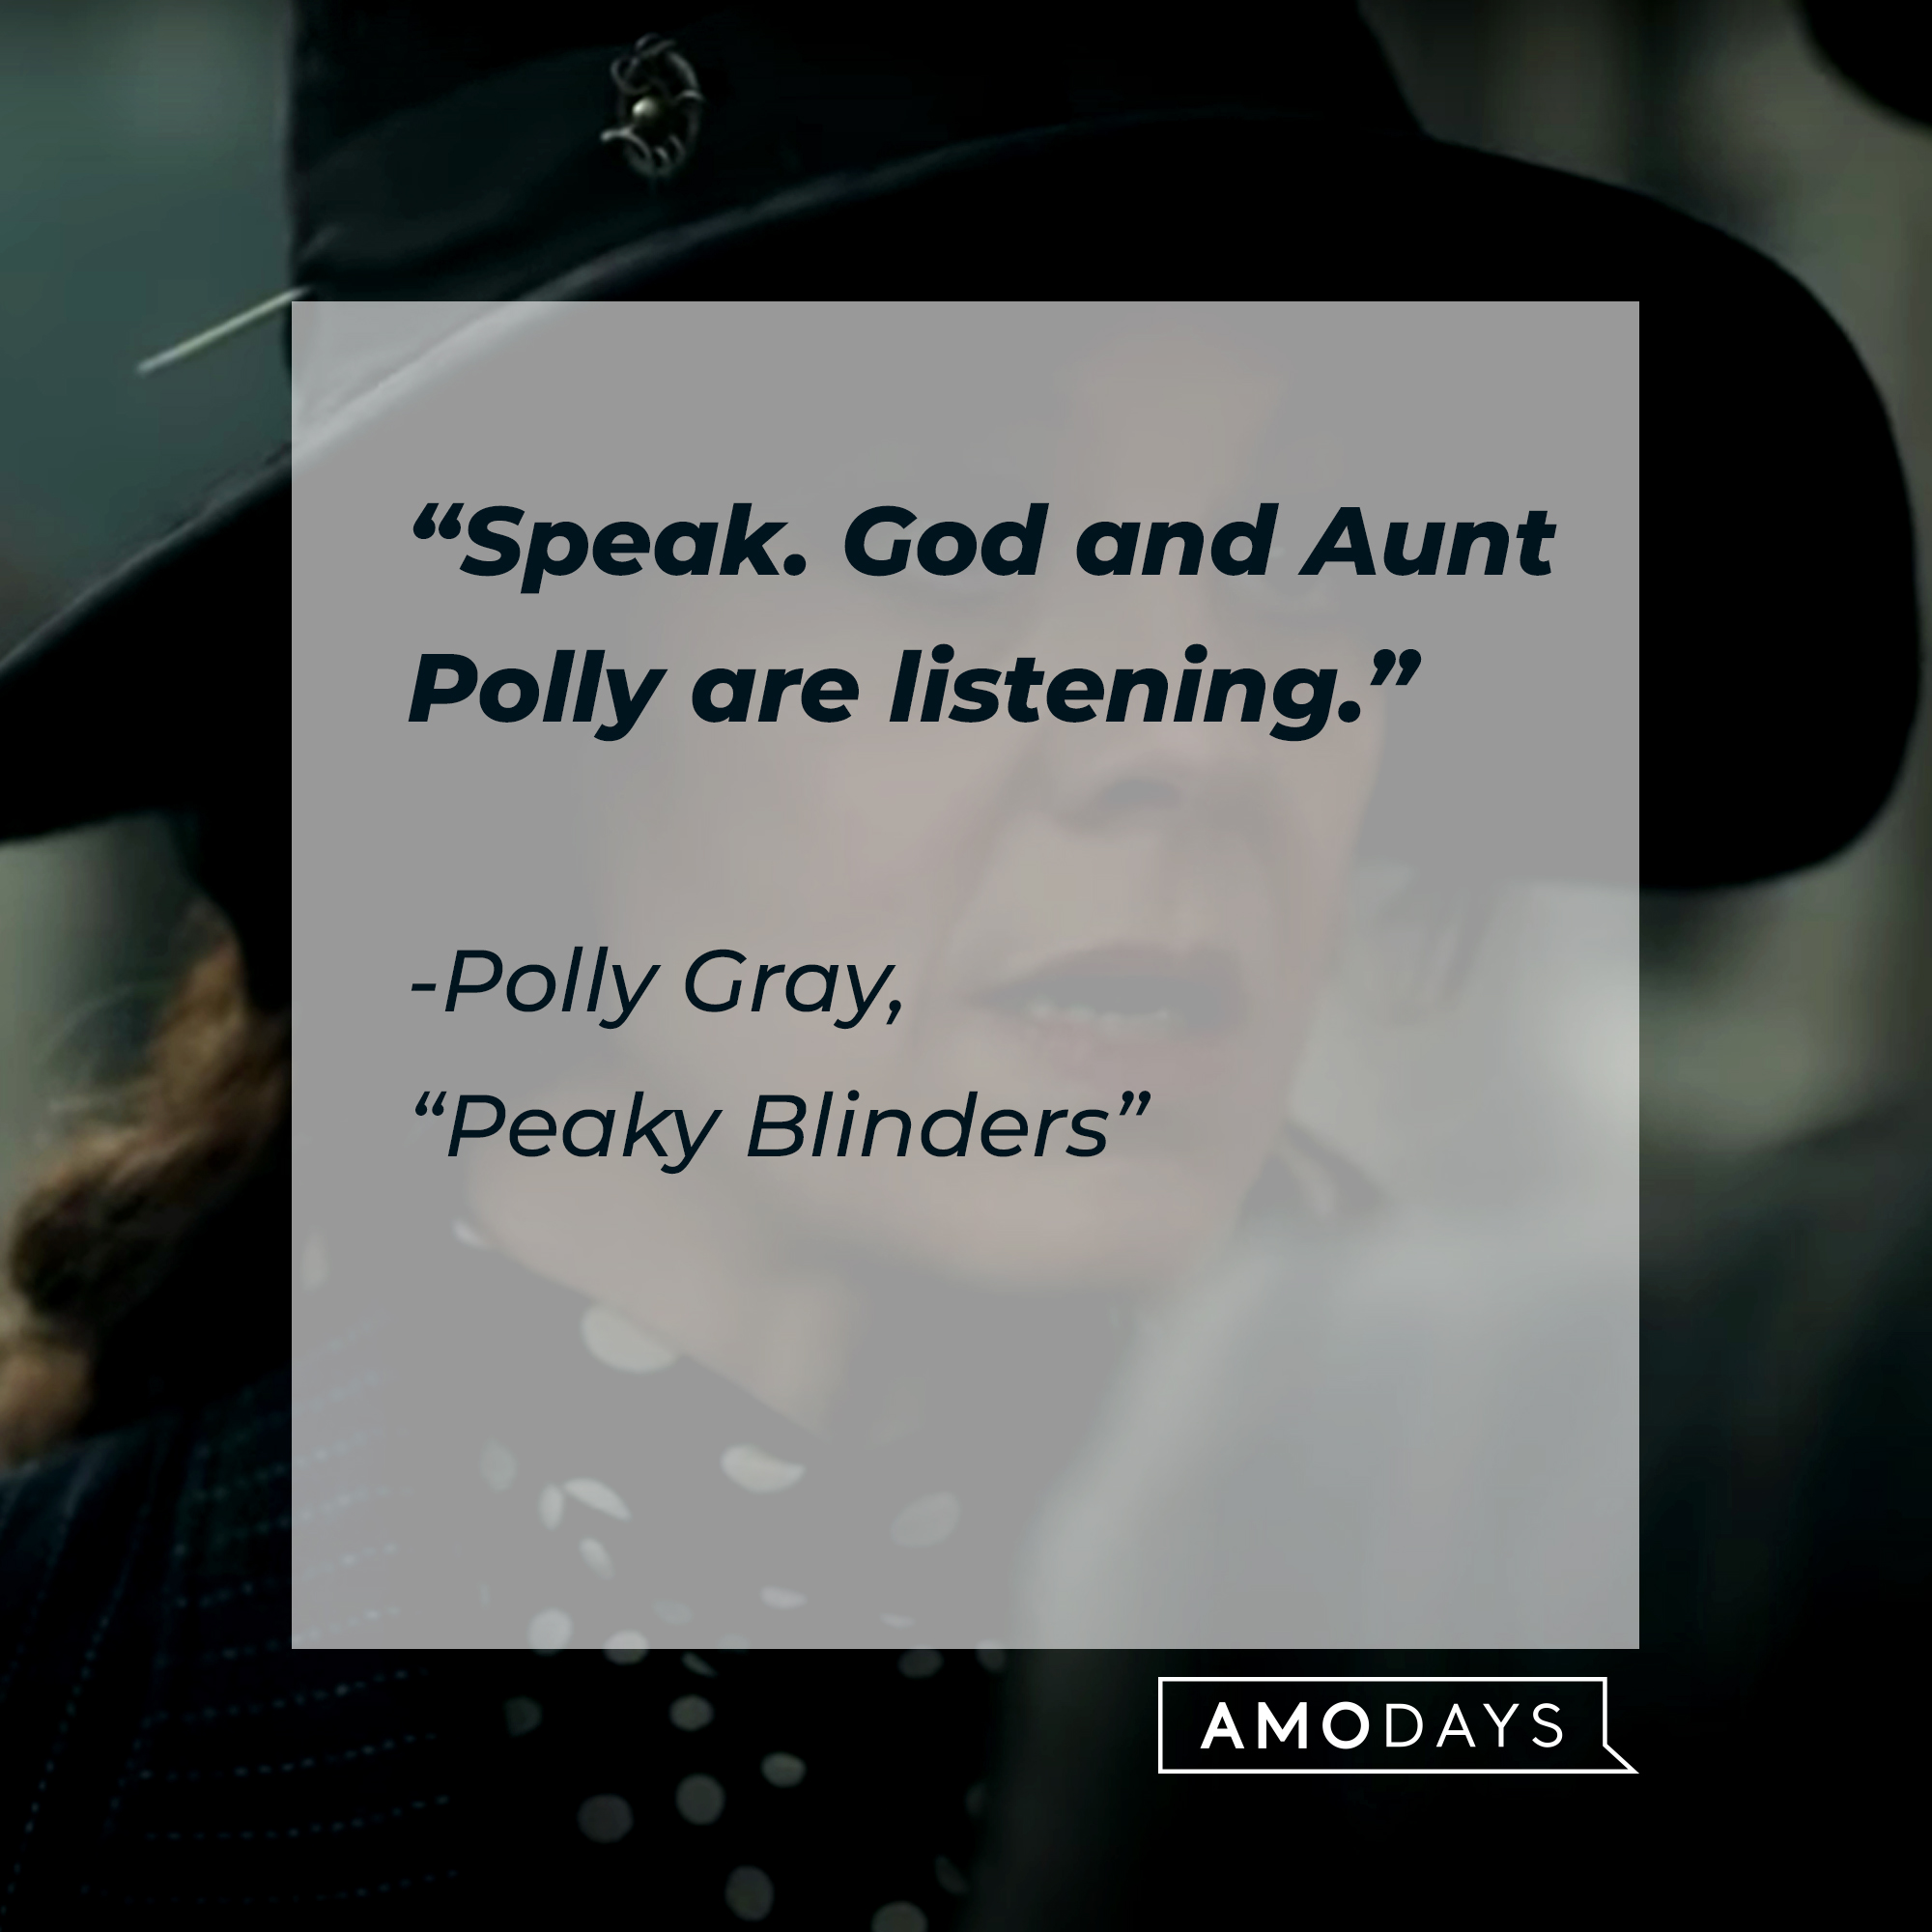 Polly Gray’s quote from “Peaky Blinders”: “Speak. God and Aunt Polly are listening.” | Source: Youtube.com/BBC